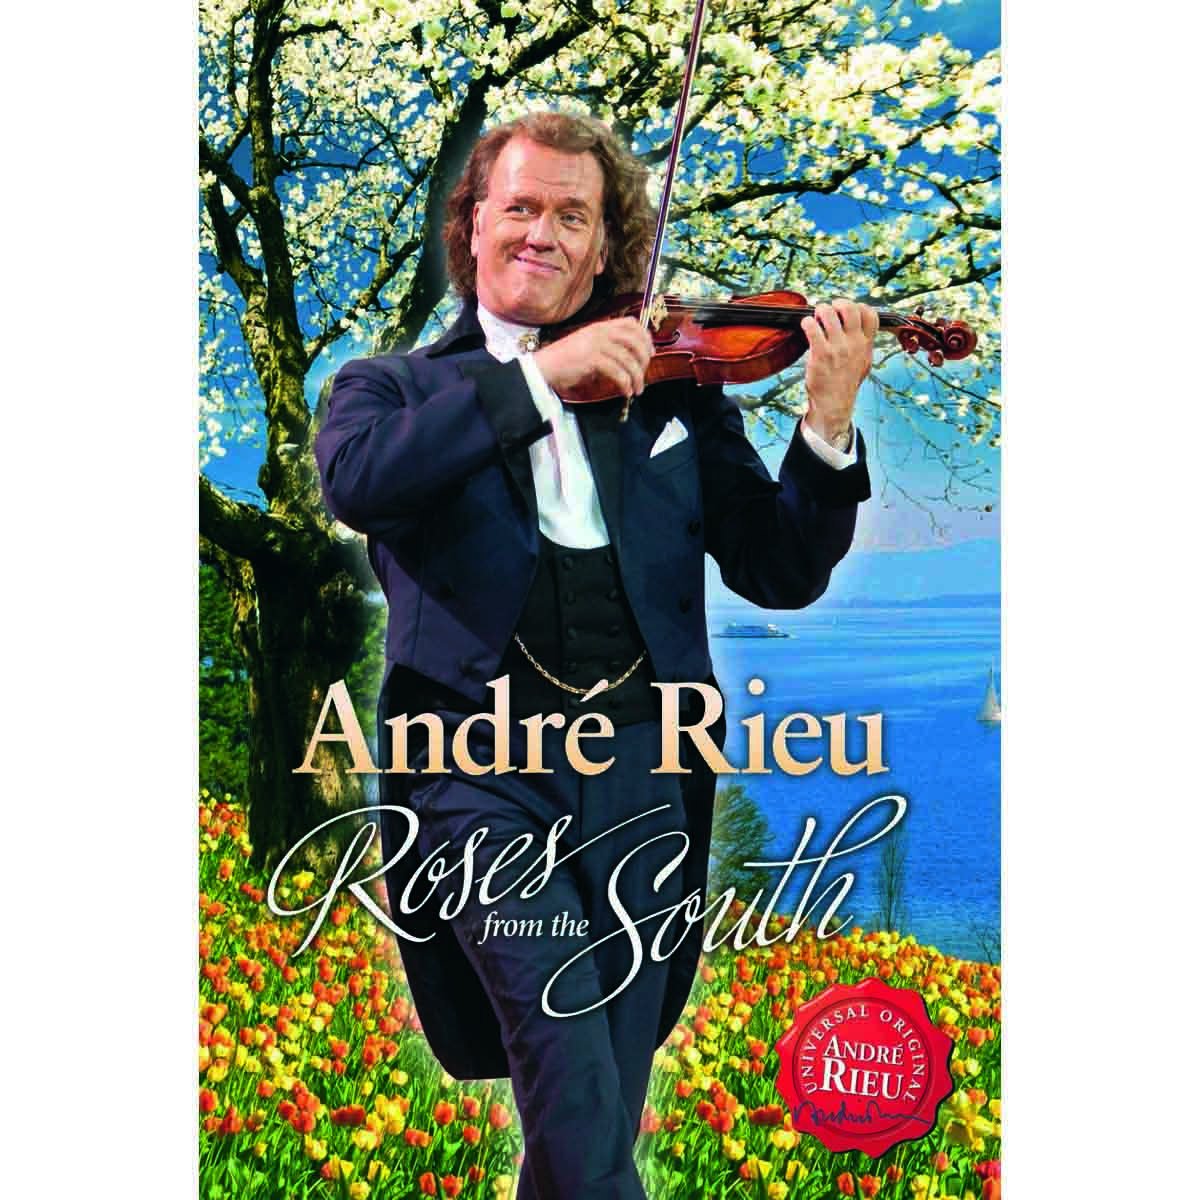 Dvd Andre Rieu Roses From The South